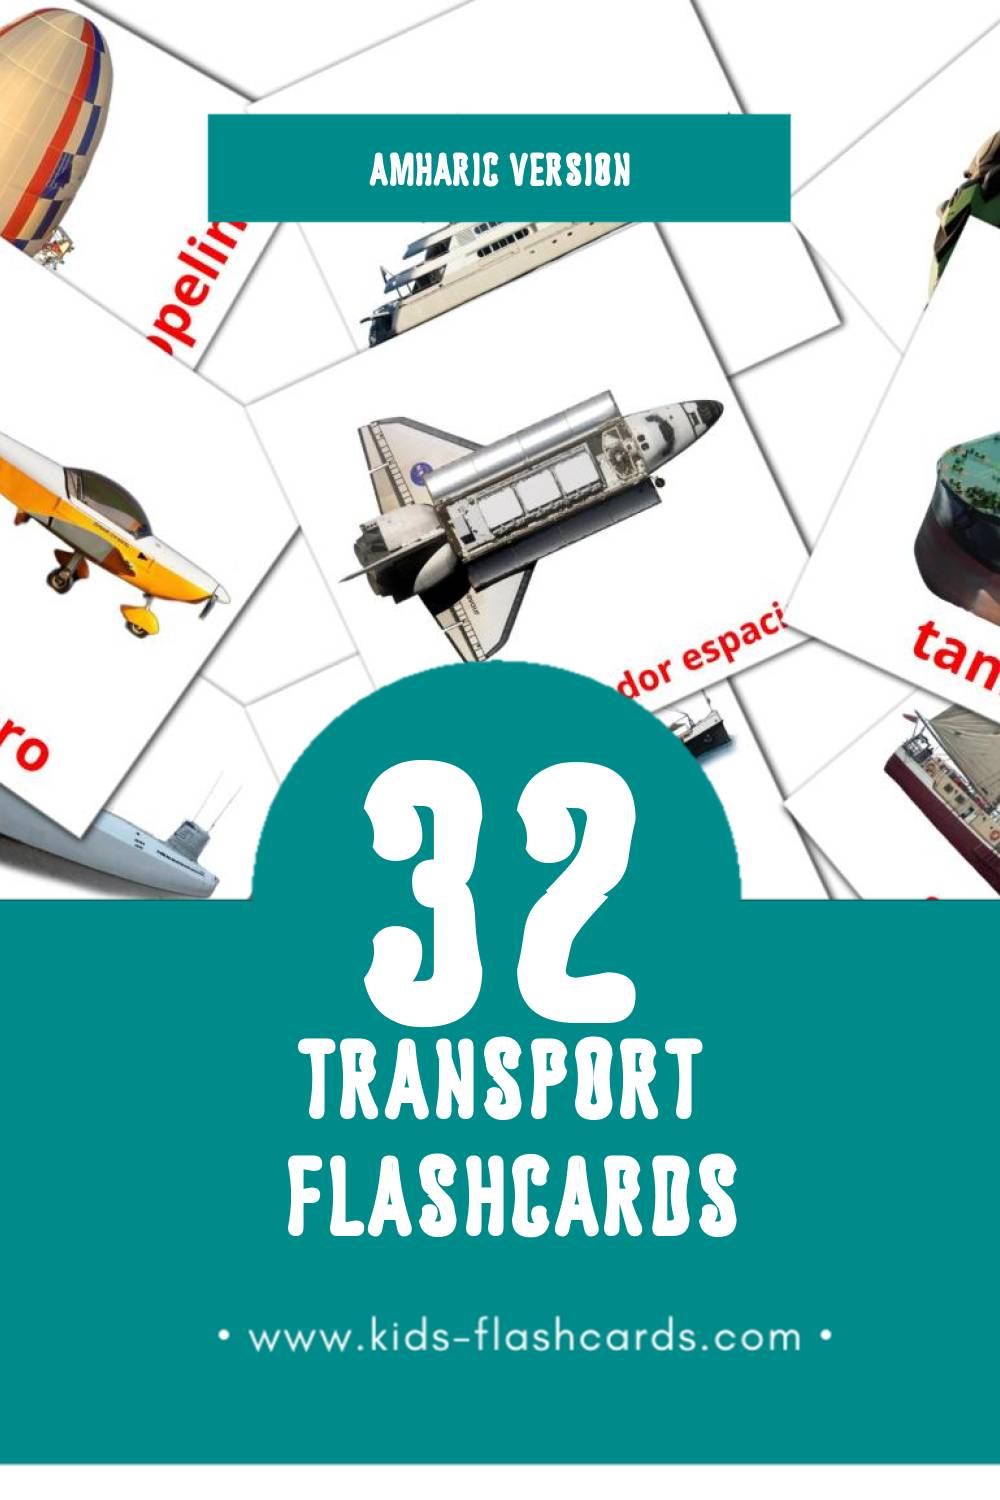 Visual Transportes  Flashcards for Toddlers (41 cards in Amharic)